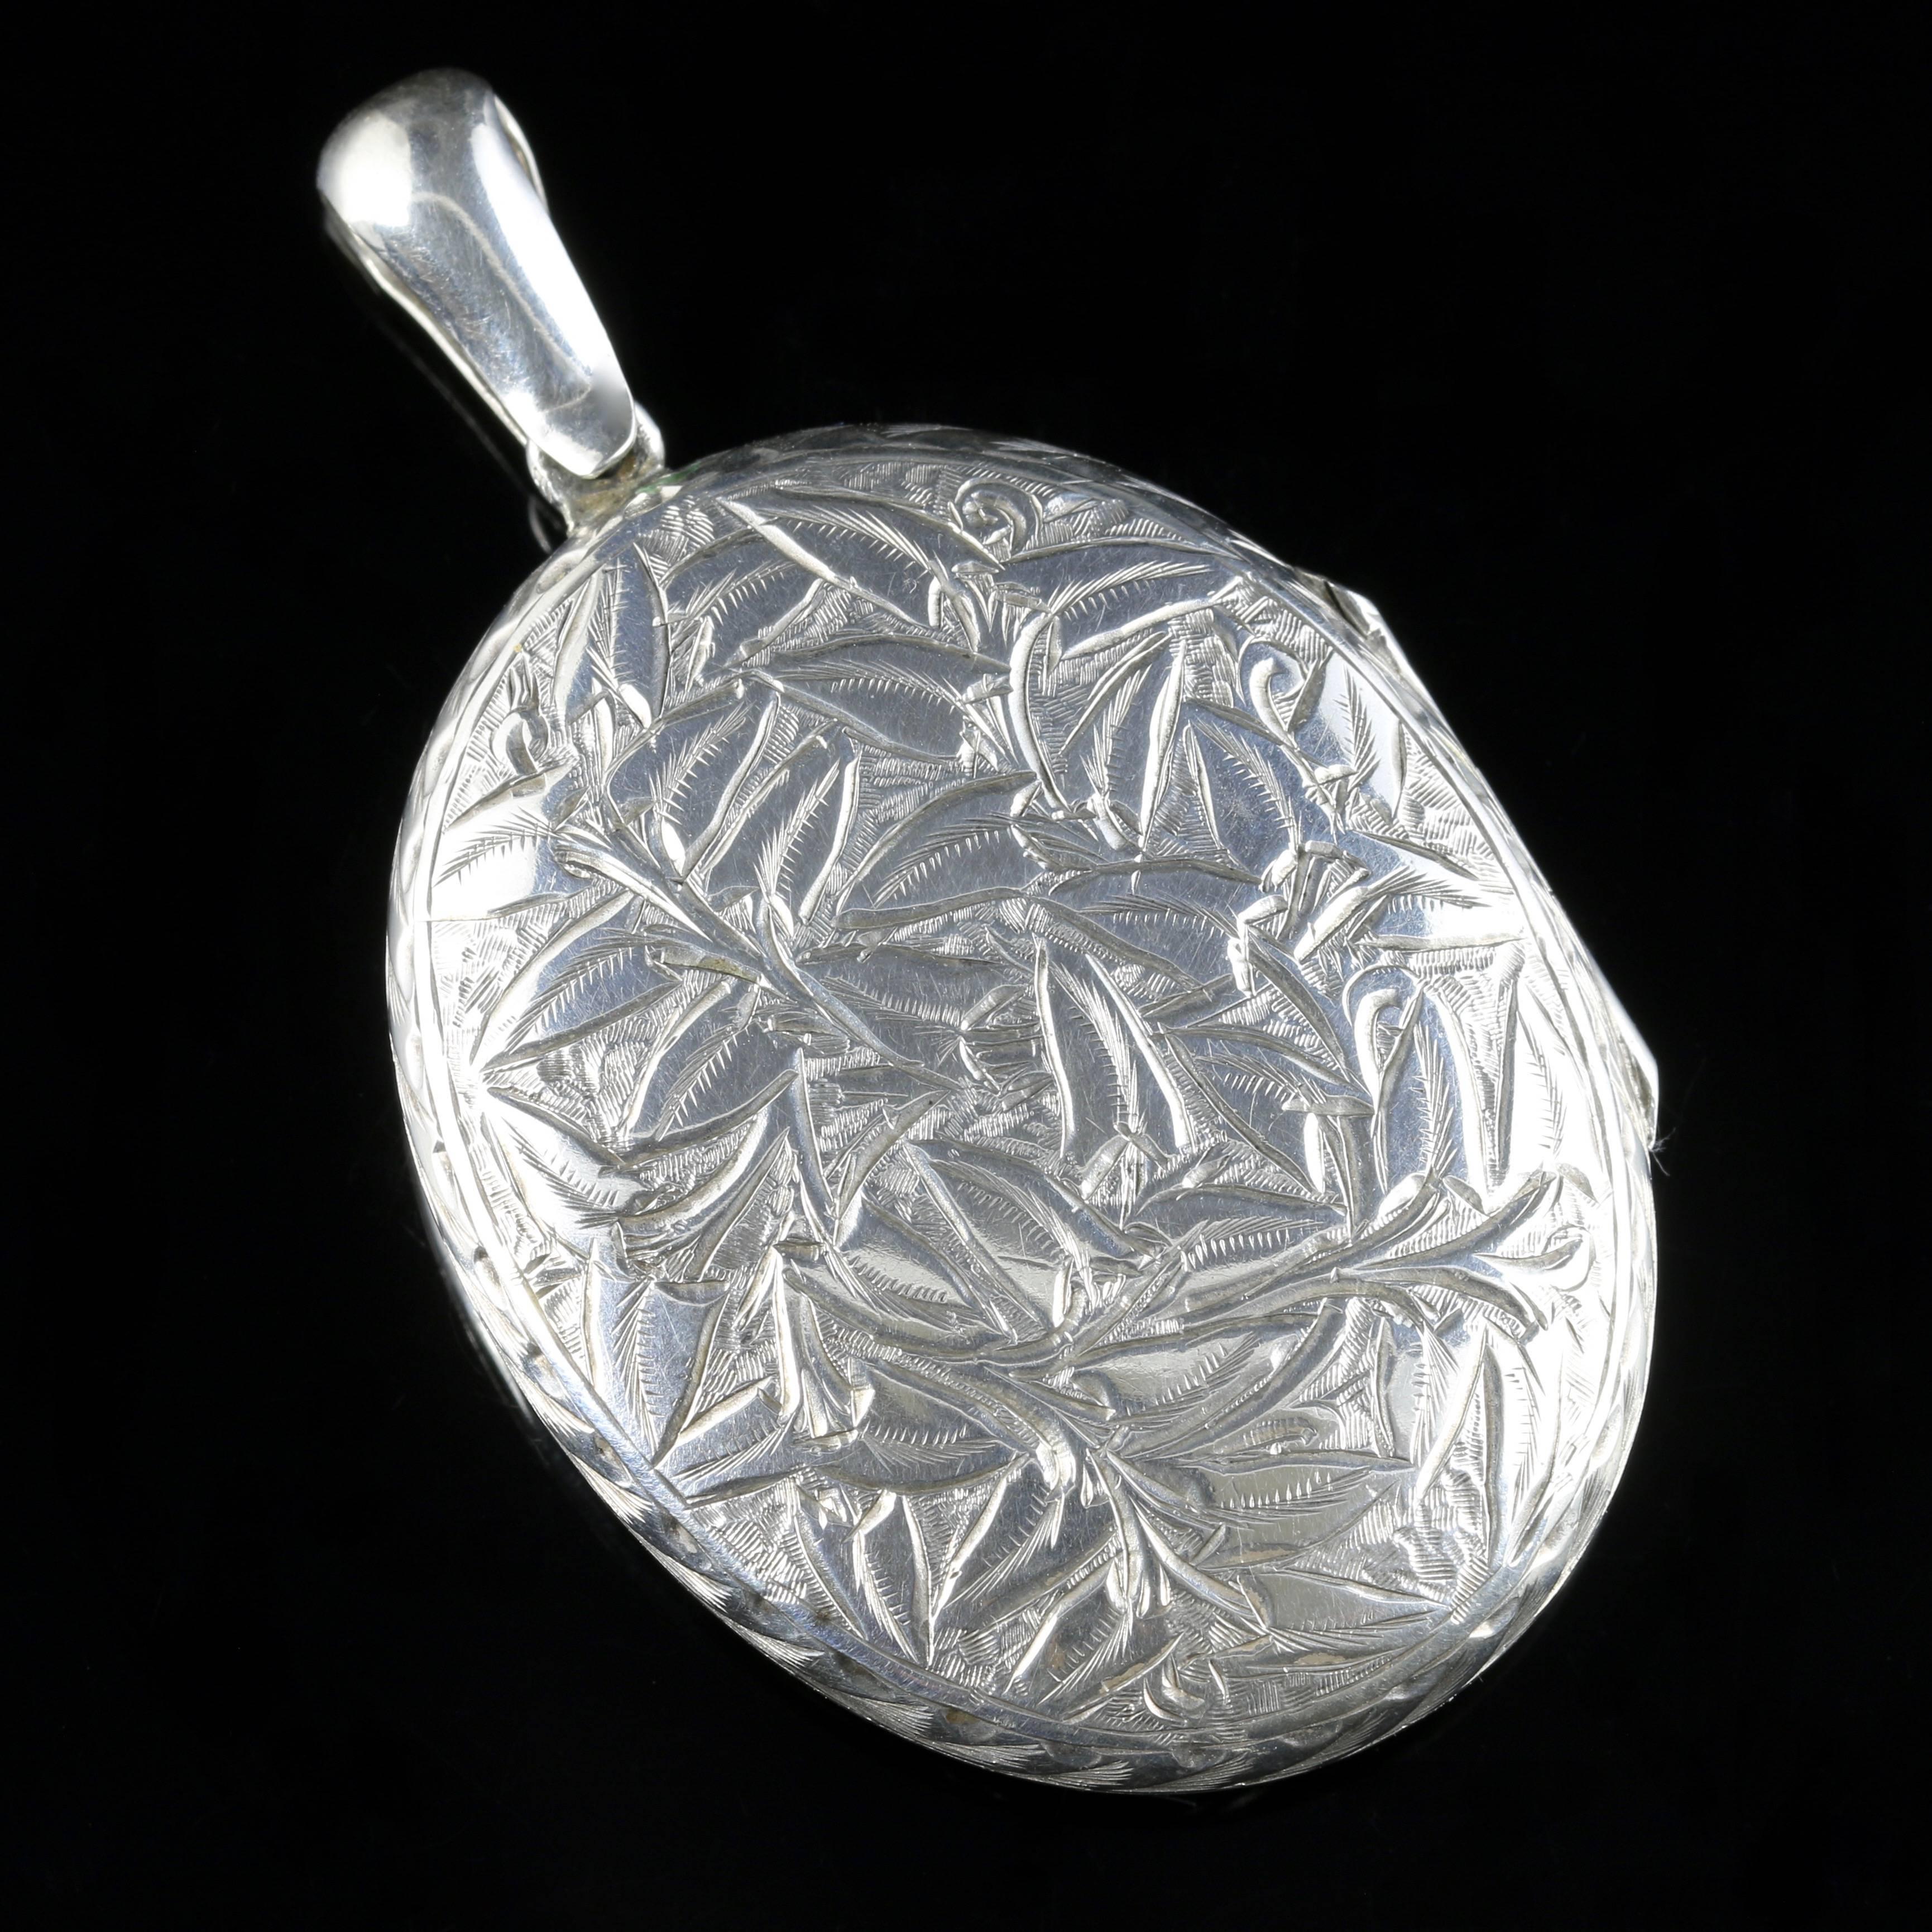 For more details please click continue reading down below...

This beautiful antique Victorian Sterling Silver engraved Ivy locket is Circa 1900.

The wonderful locket is beautifully engraved with detailed Ivy which represents a loving eternal